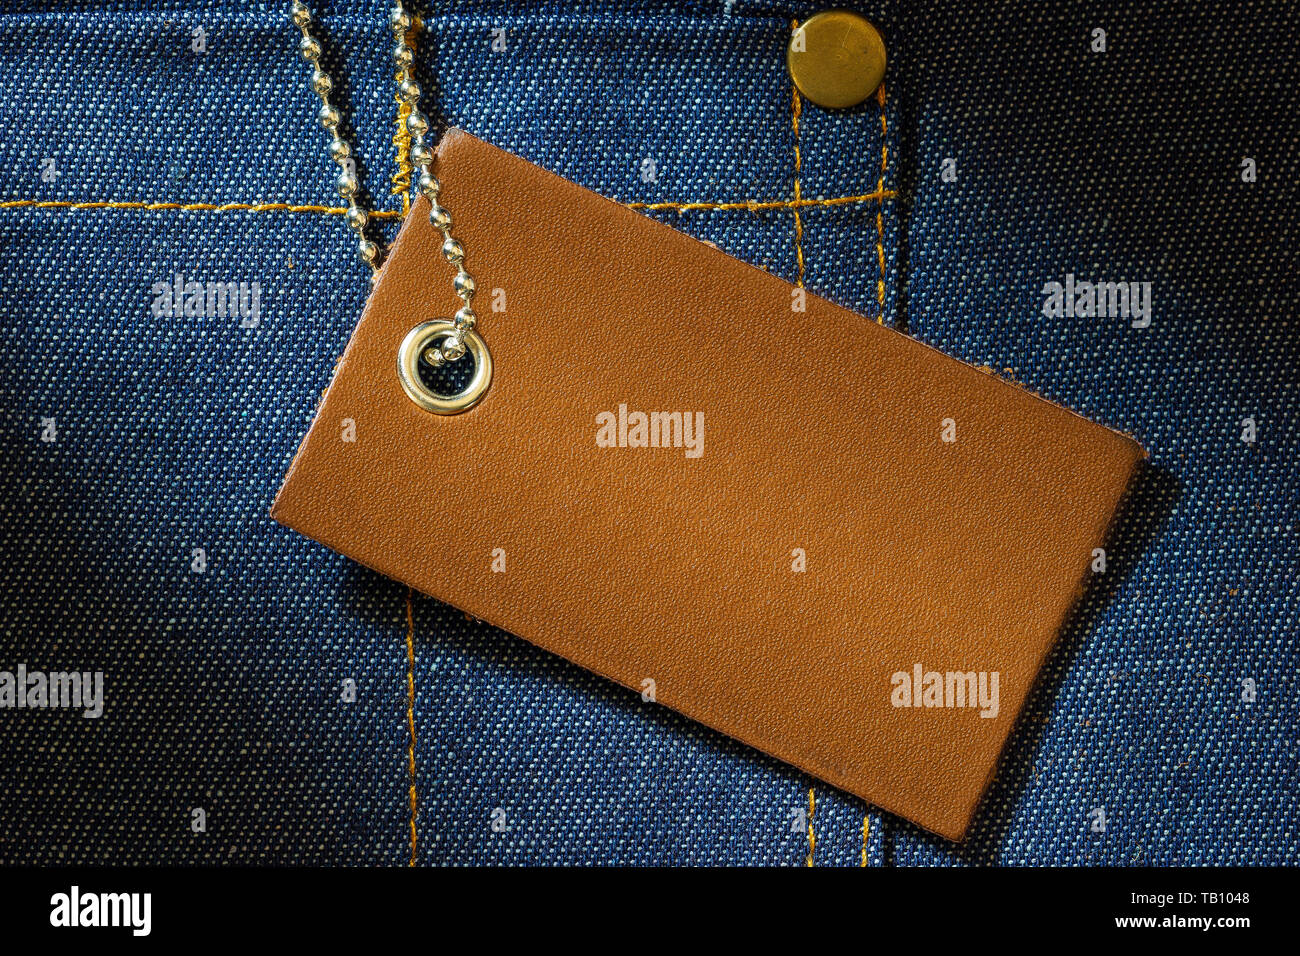 Leather label of product price and stainless steel ball chain on denim clothing. The concept of Fashion jeans. Stock Photo